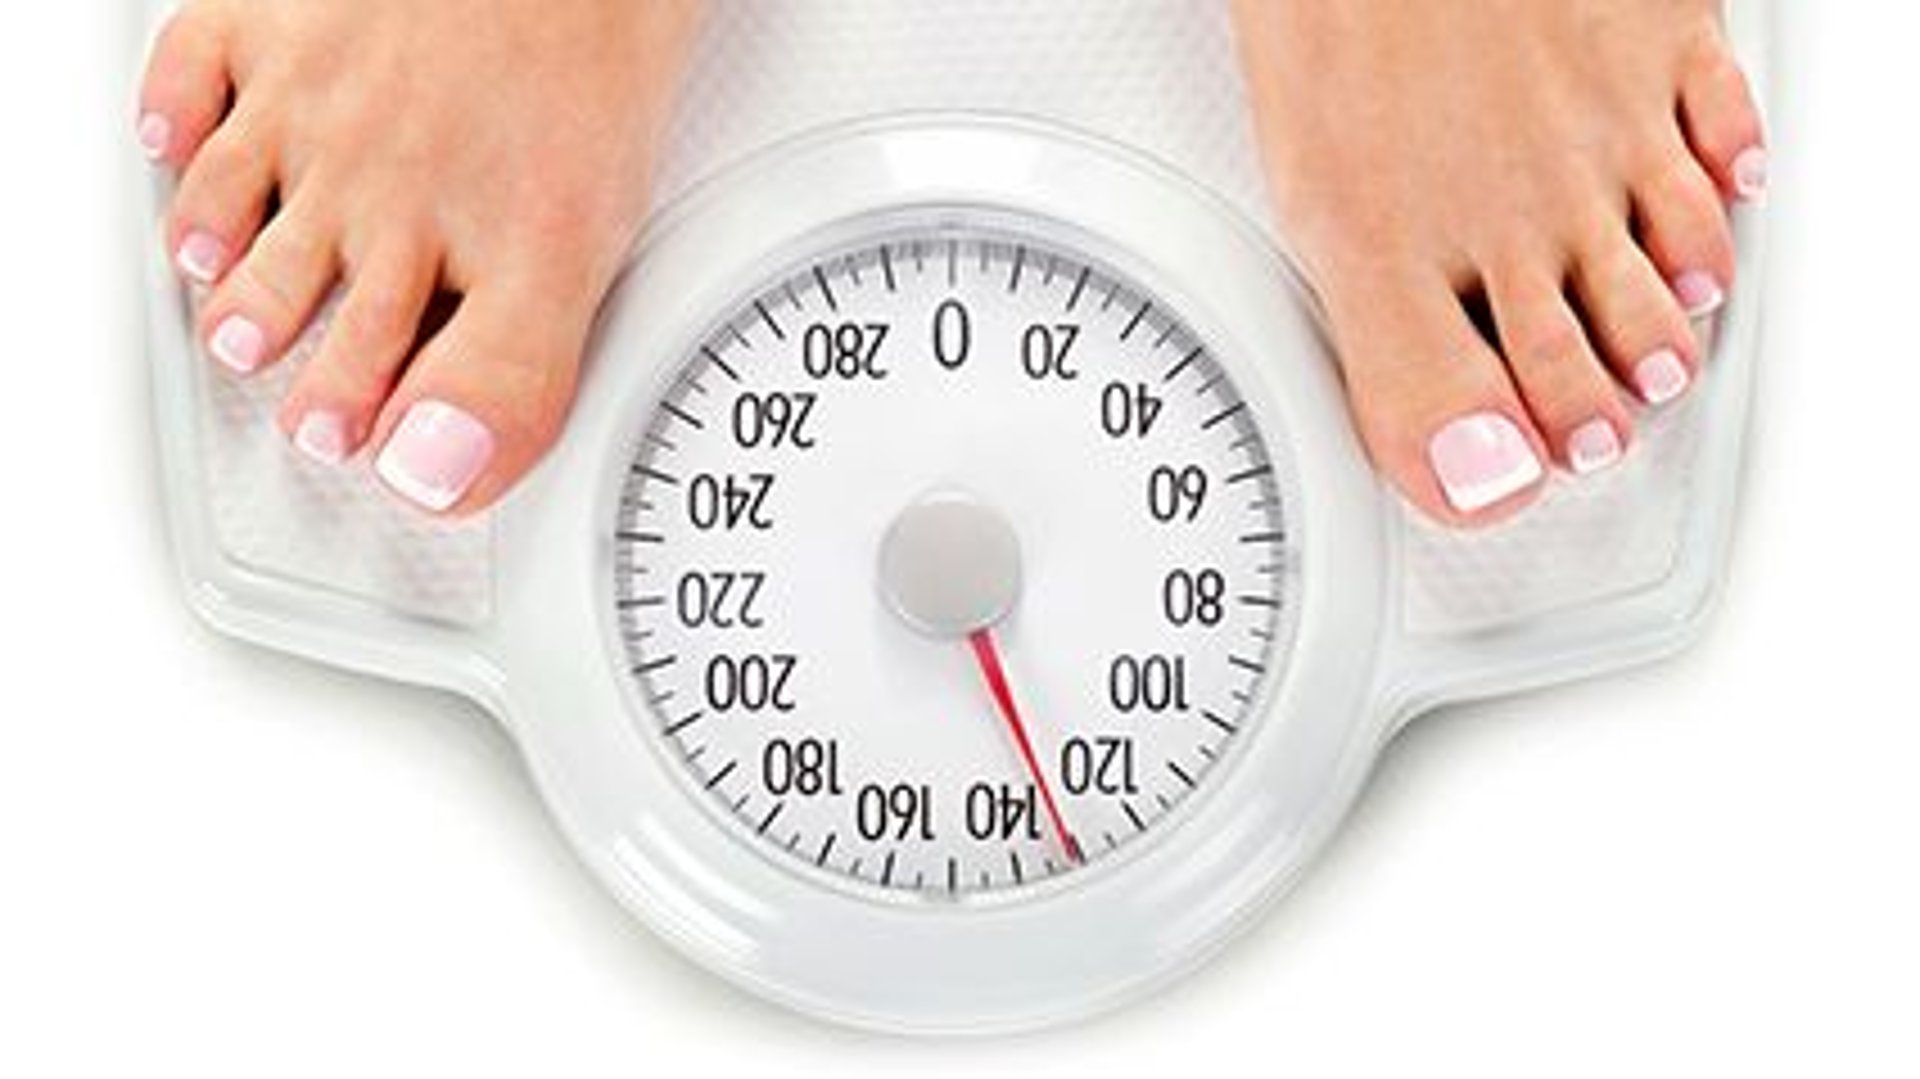 New Weight-Loss Drug Can Cut 15-20% of Body Weight thumbnail